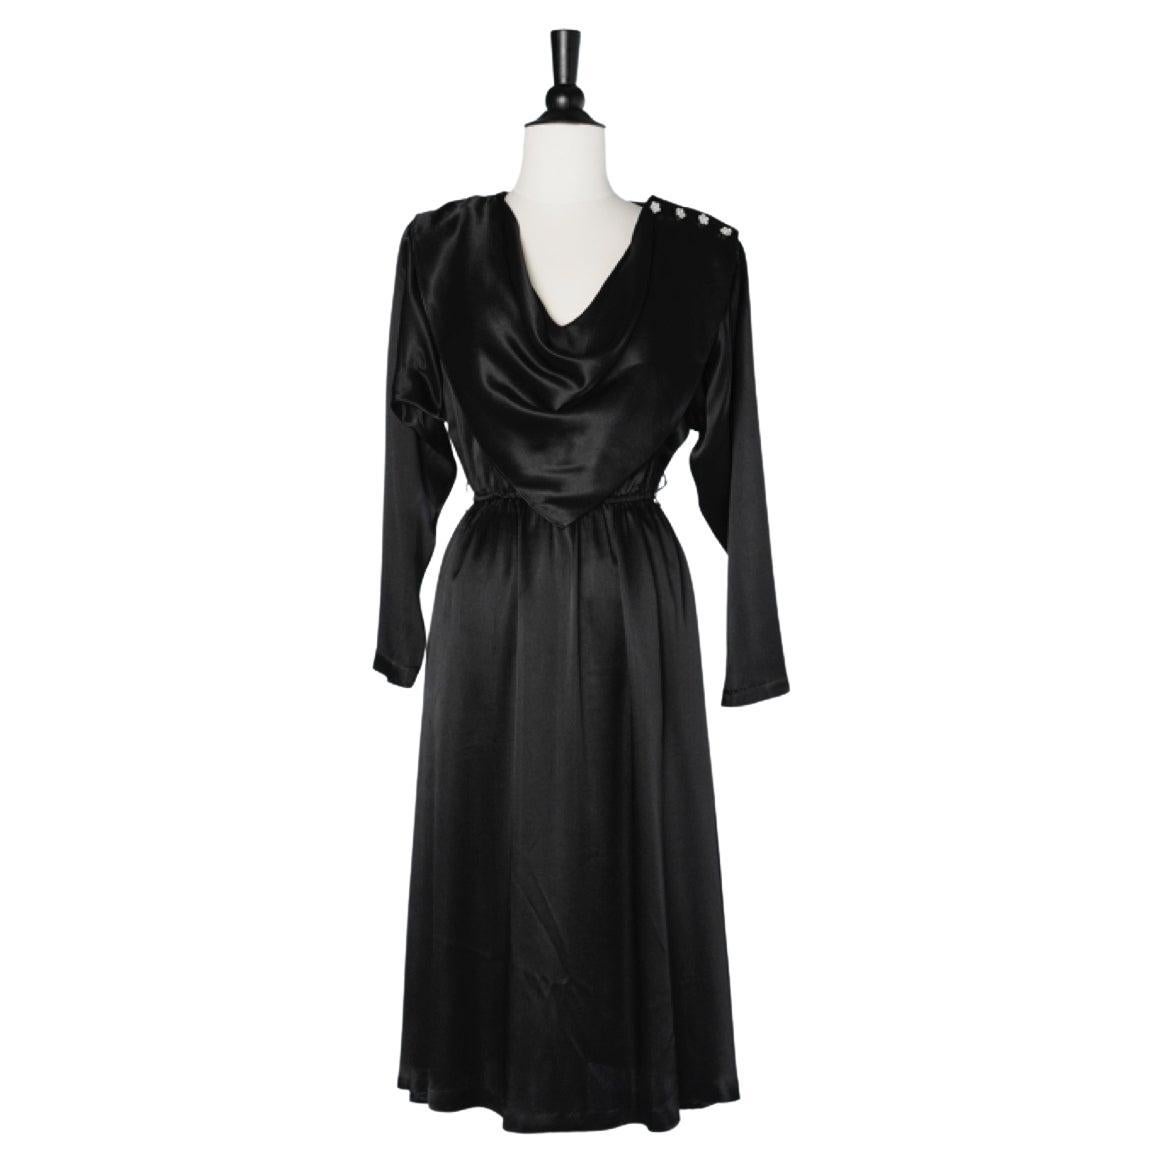 Black cocktail satin dress with rhinestone buttons on the shoulder Pierre Cardin